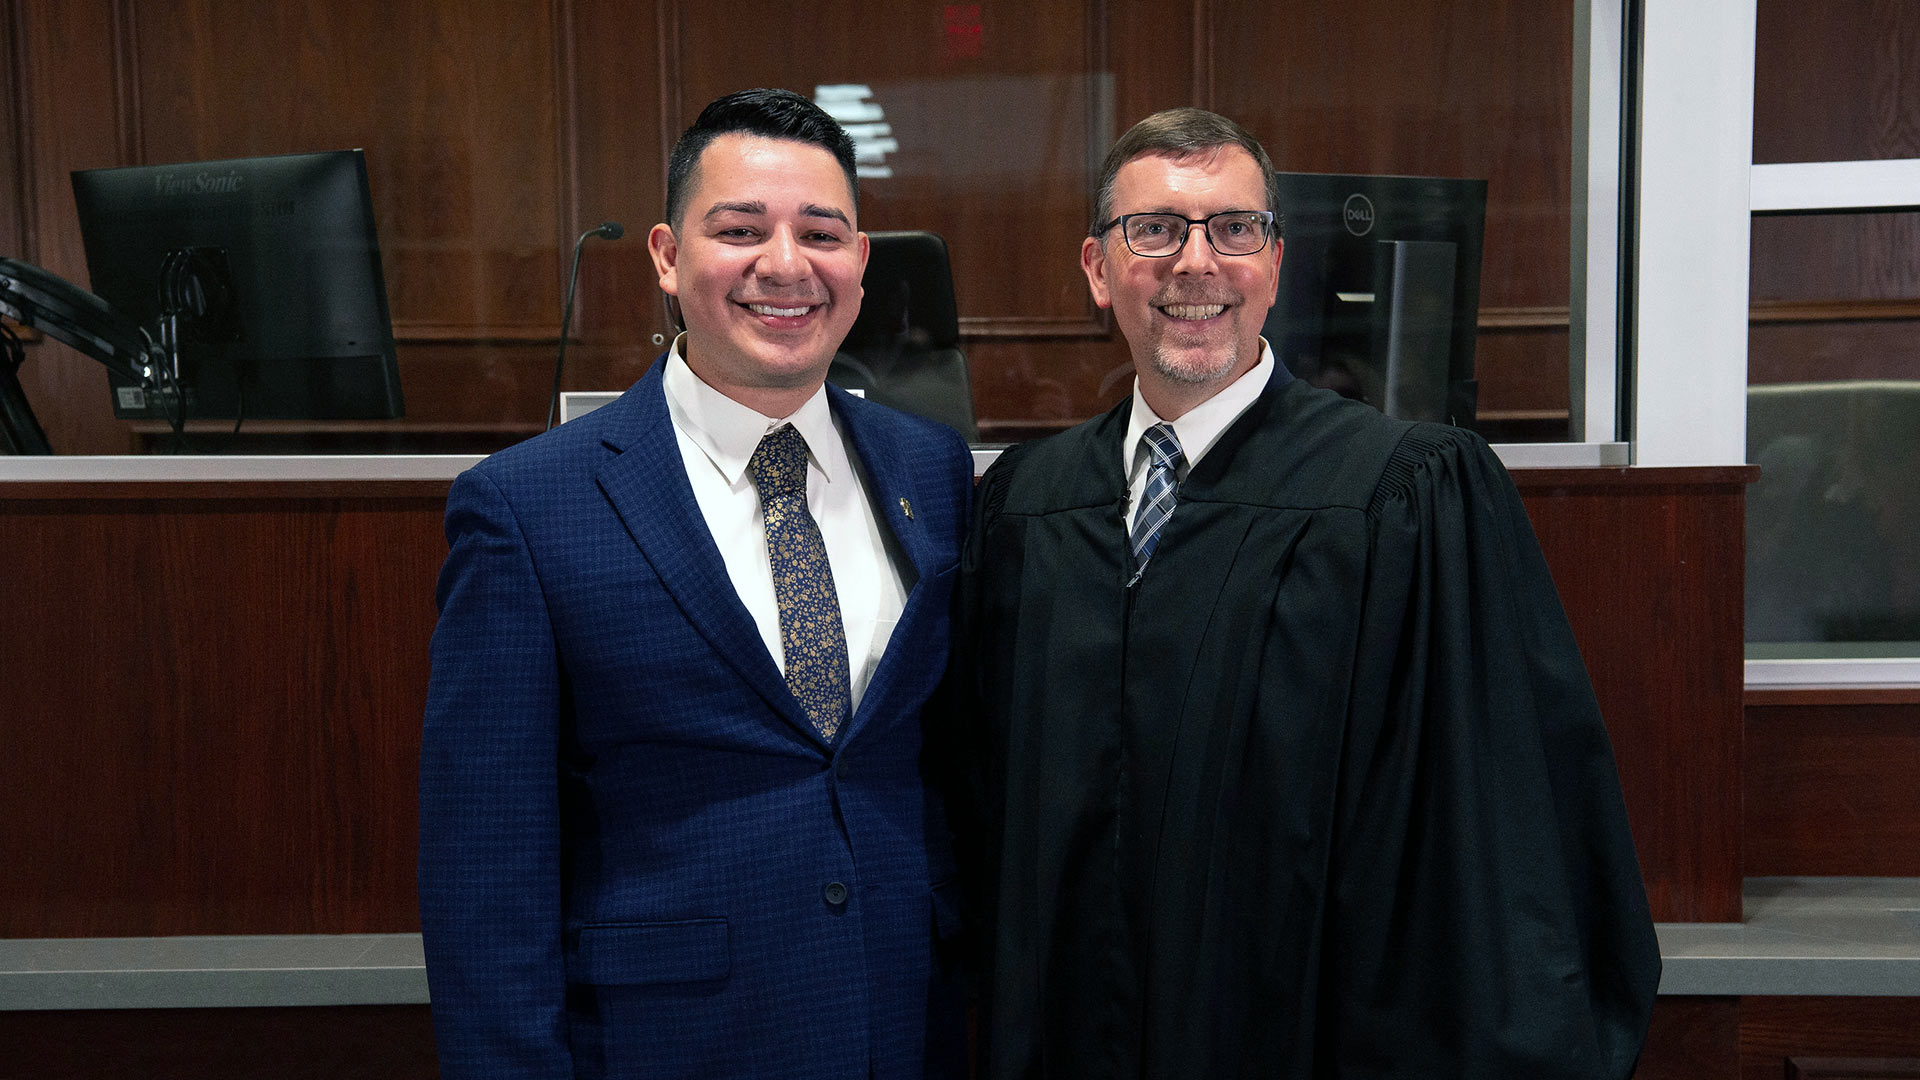 Jonathan Estrada and Jim Evans smiling in a courtroom